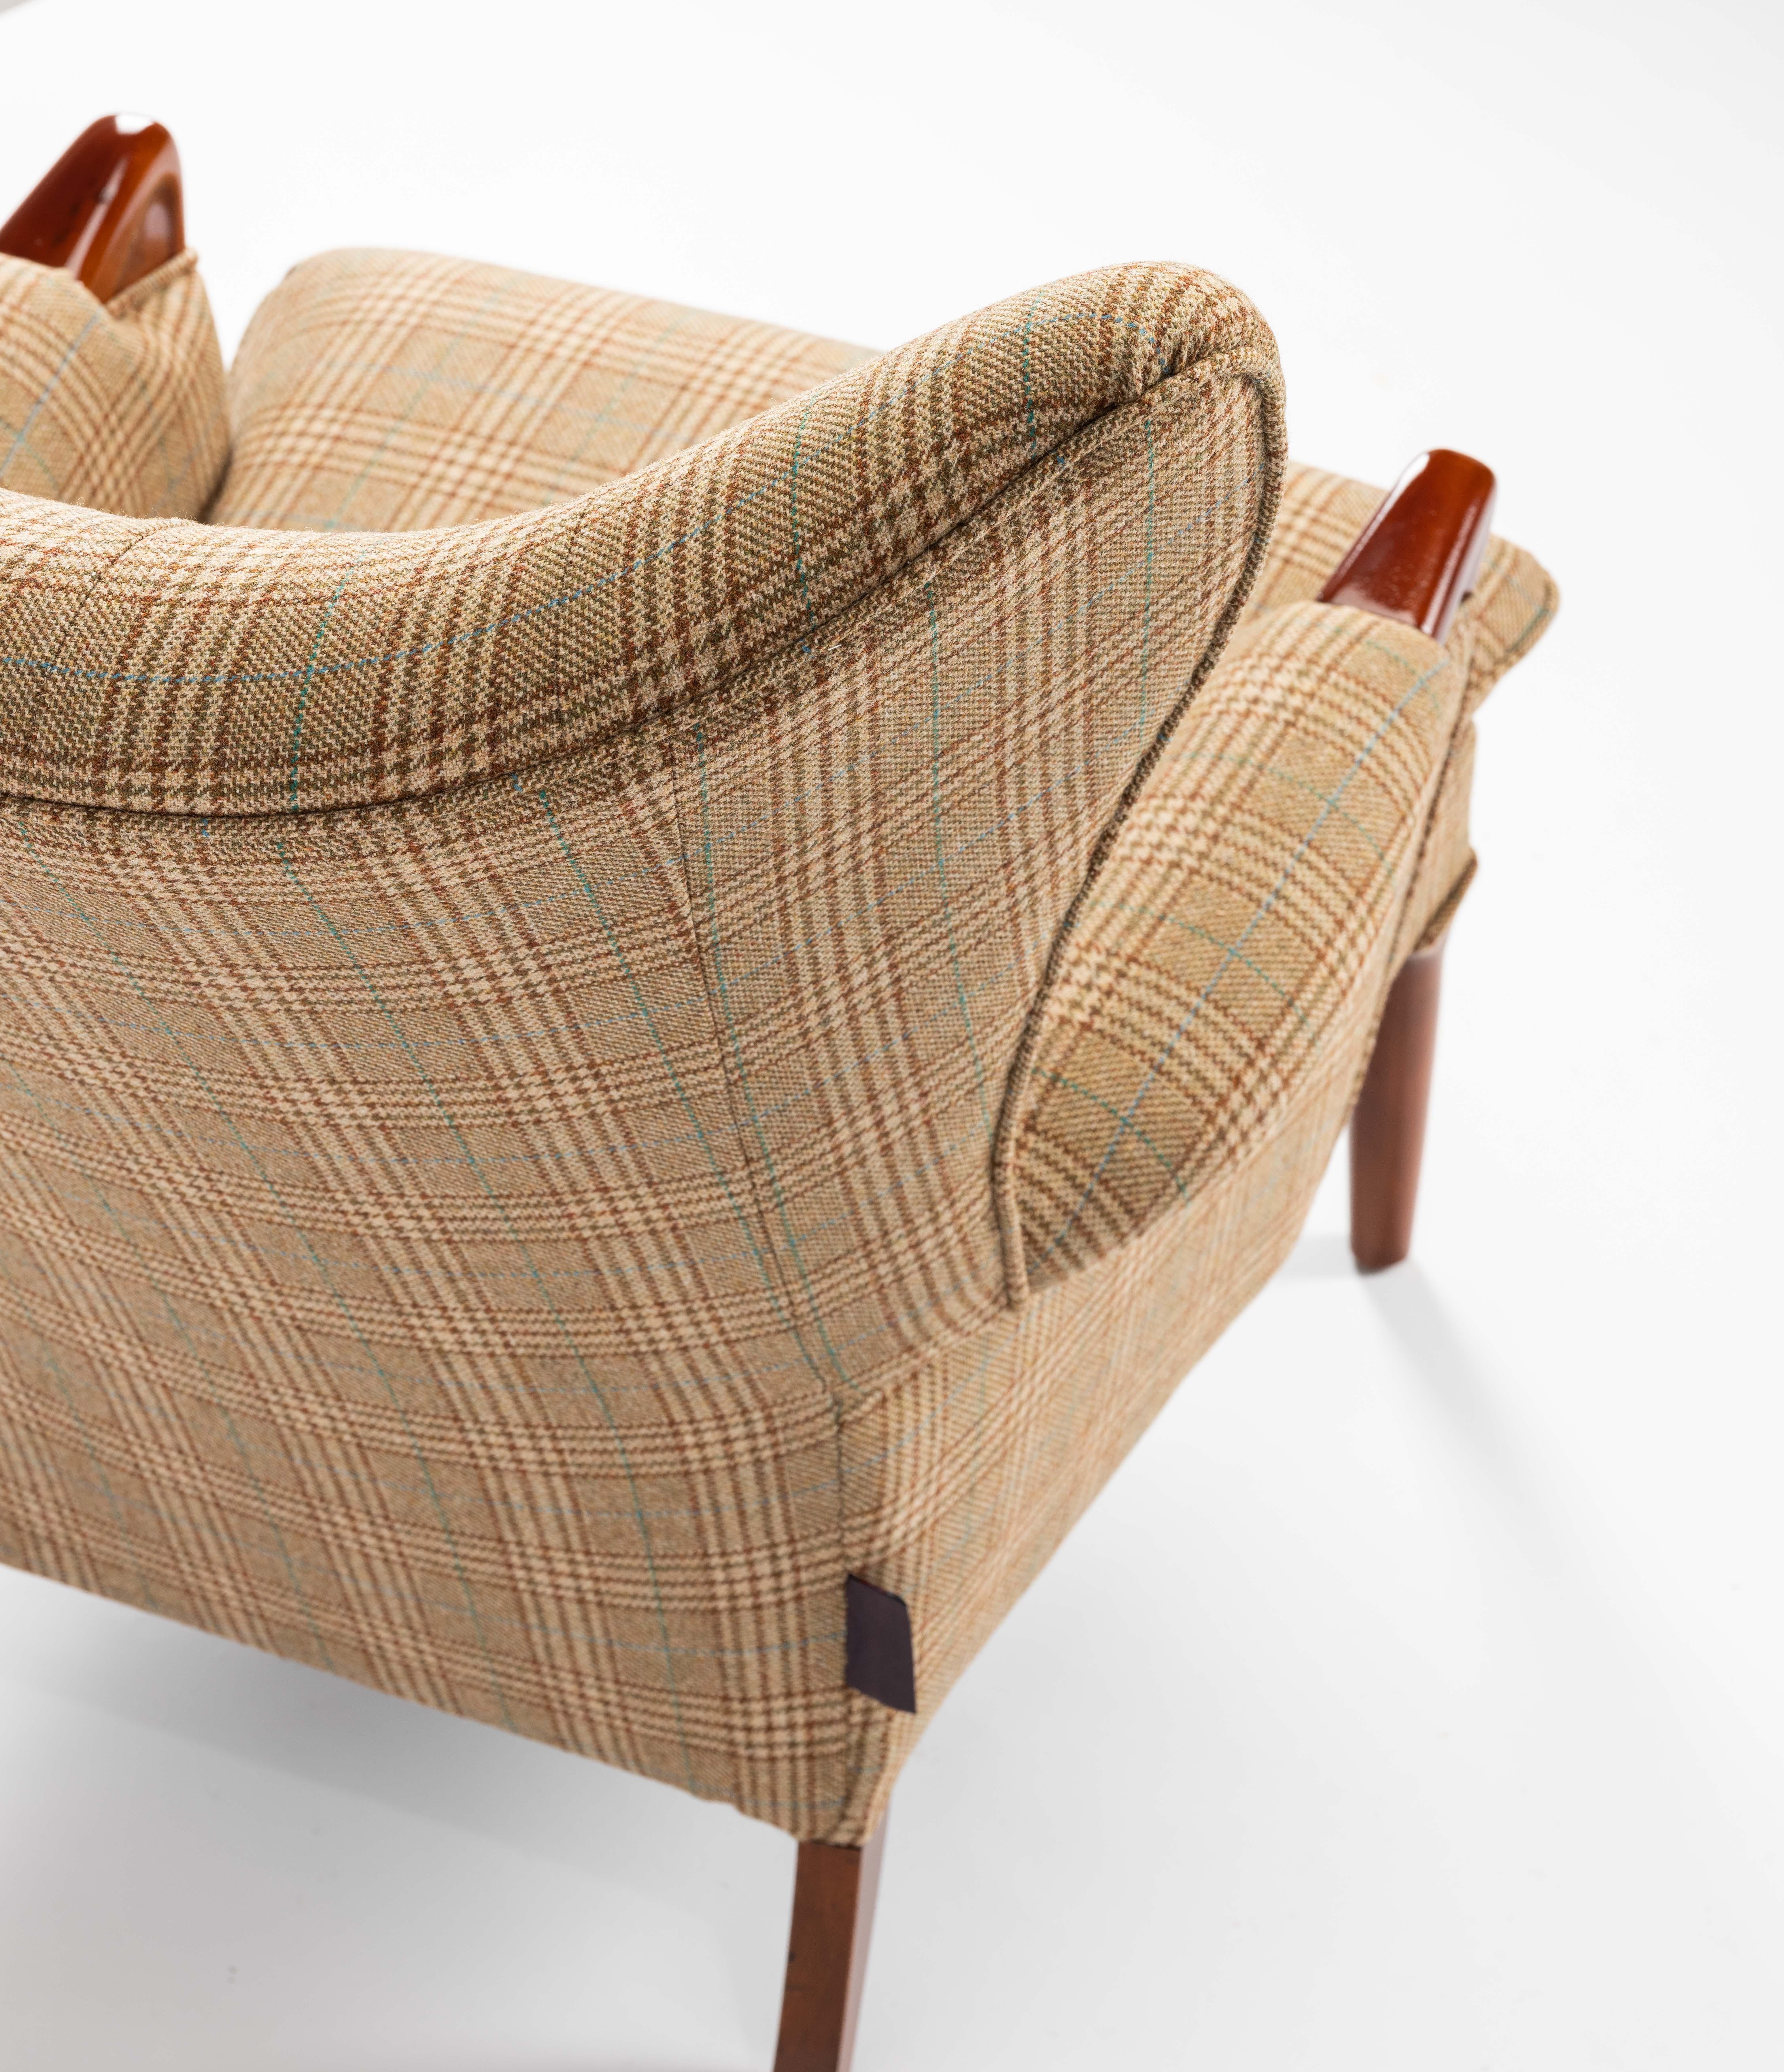 Midcentury Vintage Wingback Chairs Reupholstered in Yorkshire Tweed, circa 1960s (Britisch)